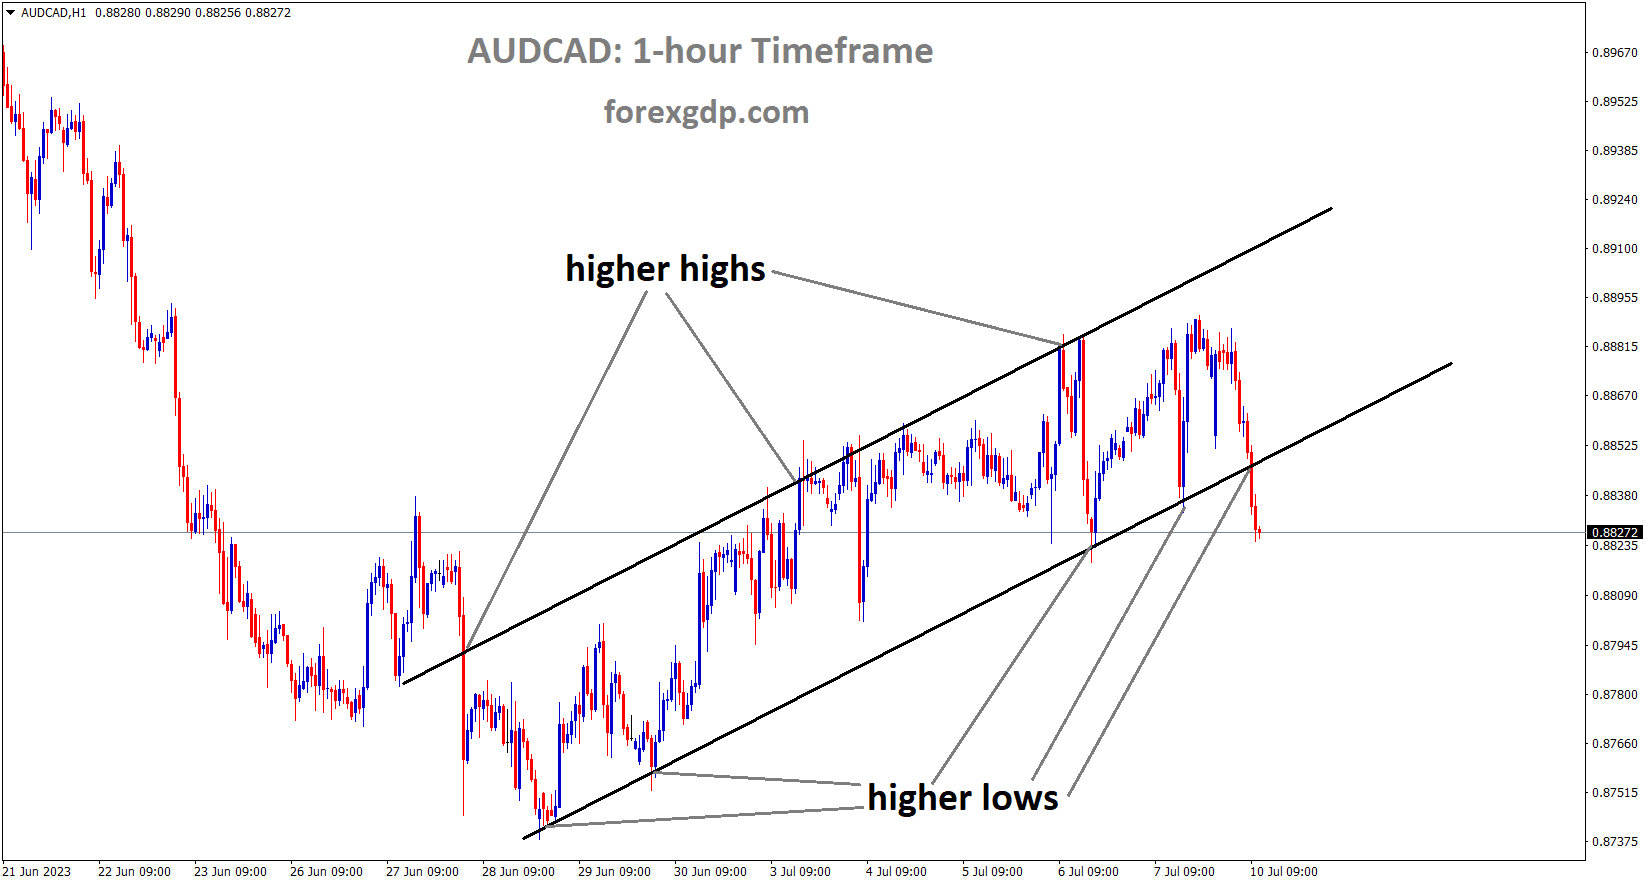 AUDCAD is moving in an Ascending channel and the market has reached the higher low area of the channel